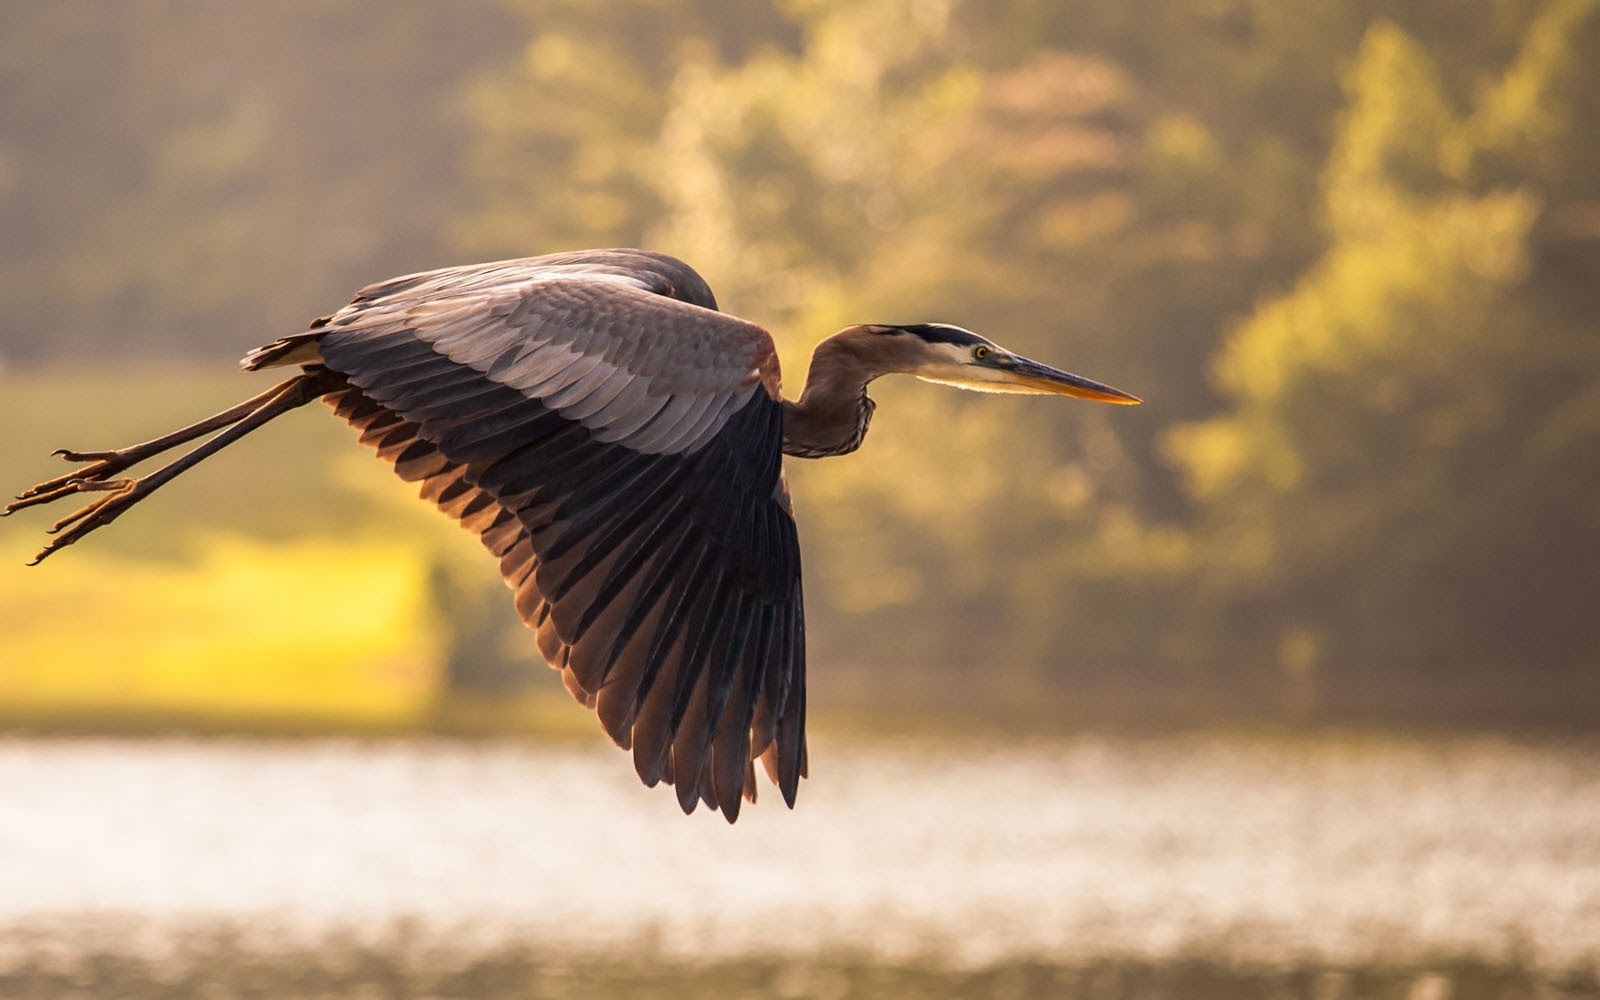 Tag Great Blue Heron Bird Wallpaper Background Photos Image And